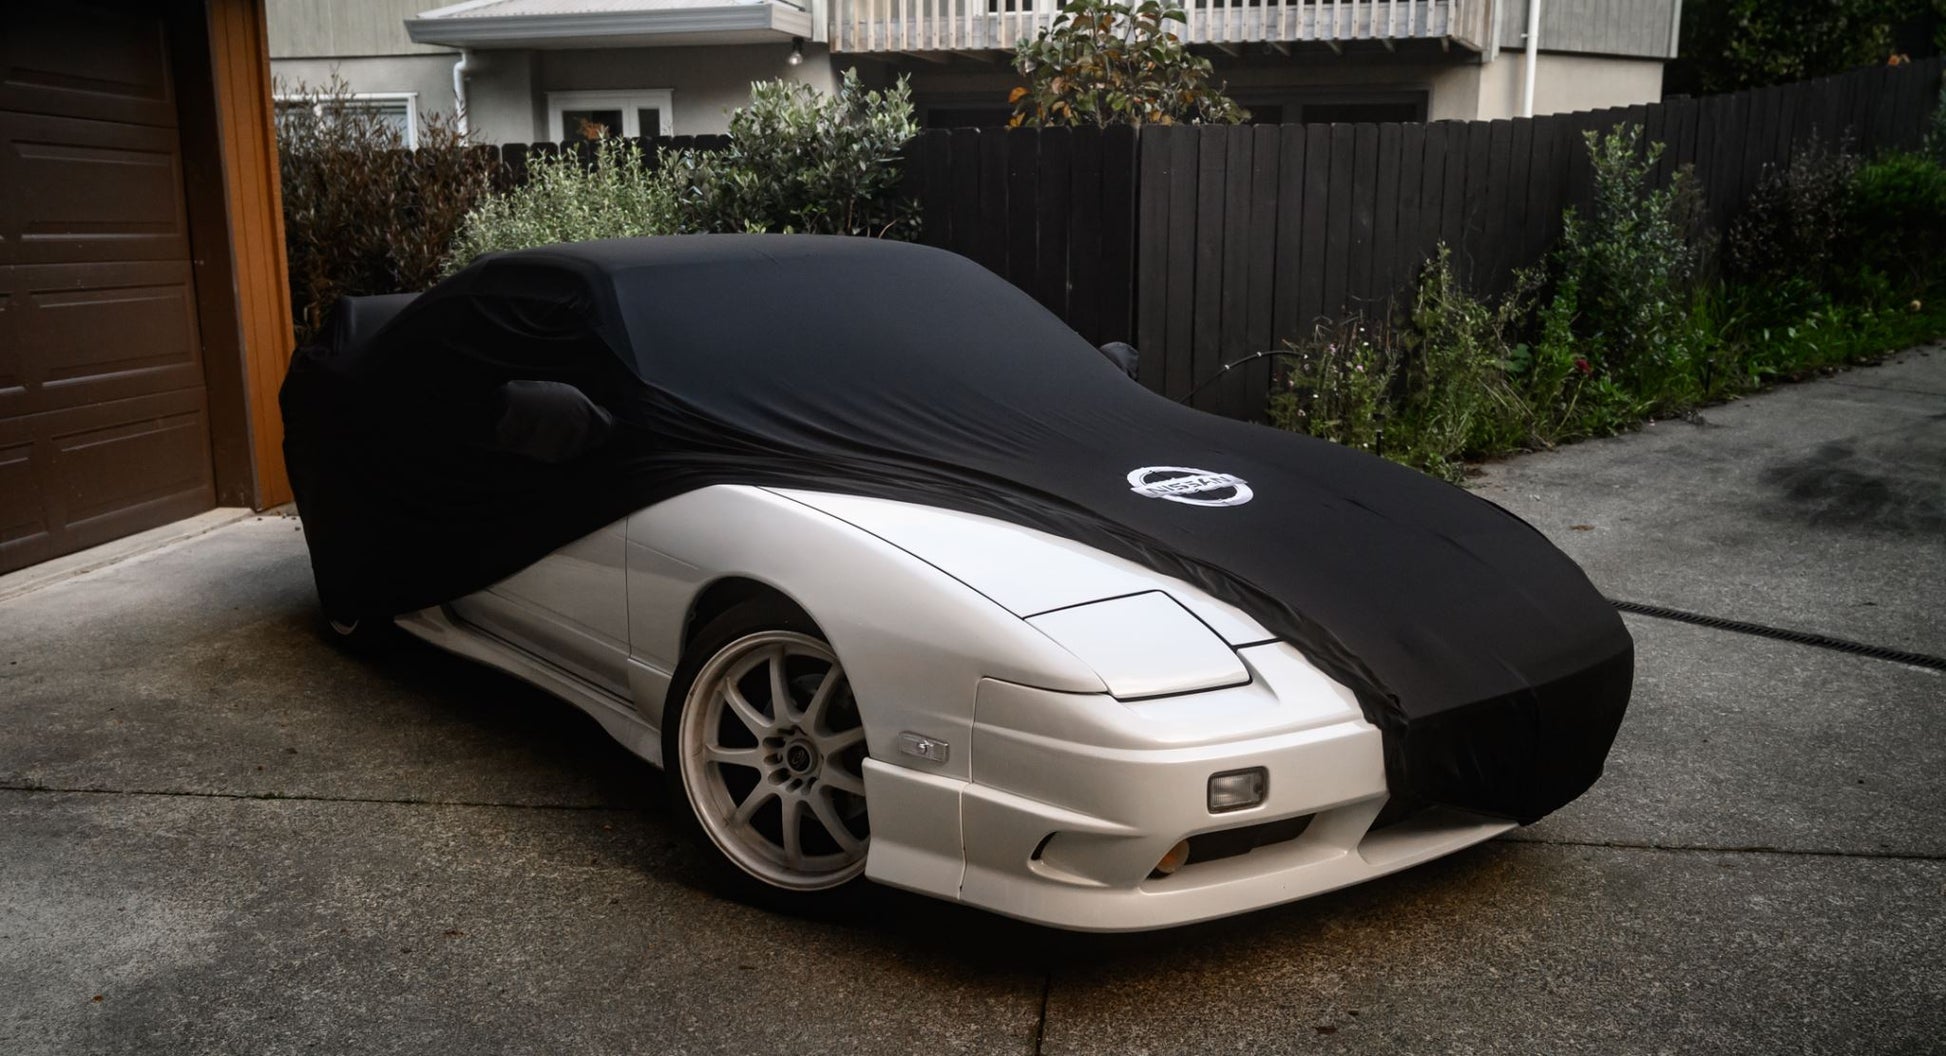 Nissan Silvia 180sx Custom-Fit Indoor Car Cover – Boosted Kiwi